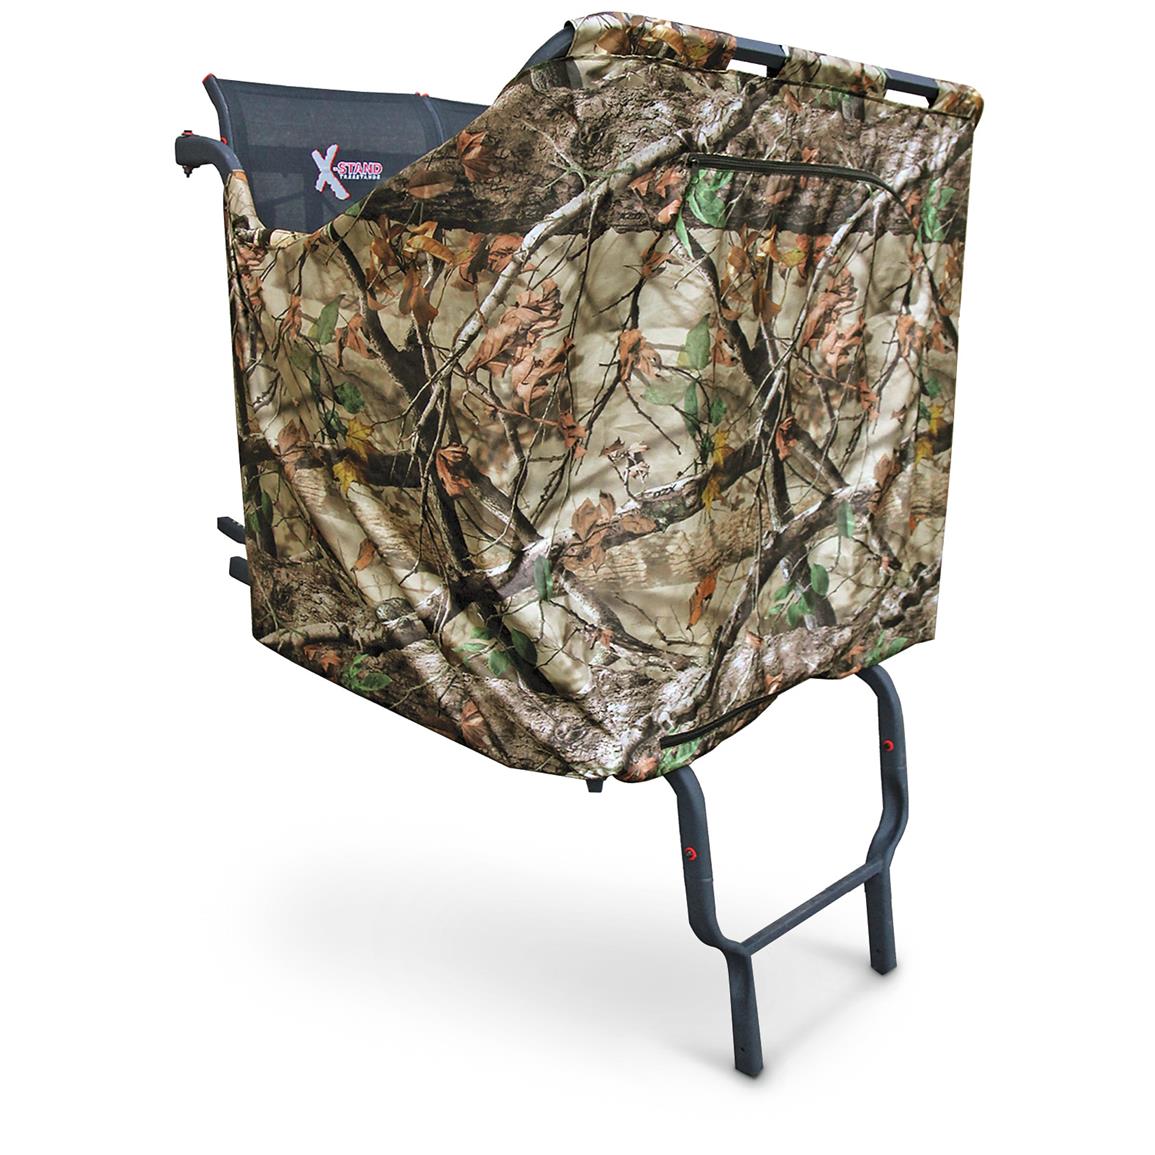 XStand 2Person Ladder Stand Blind 663971, Tree Stand